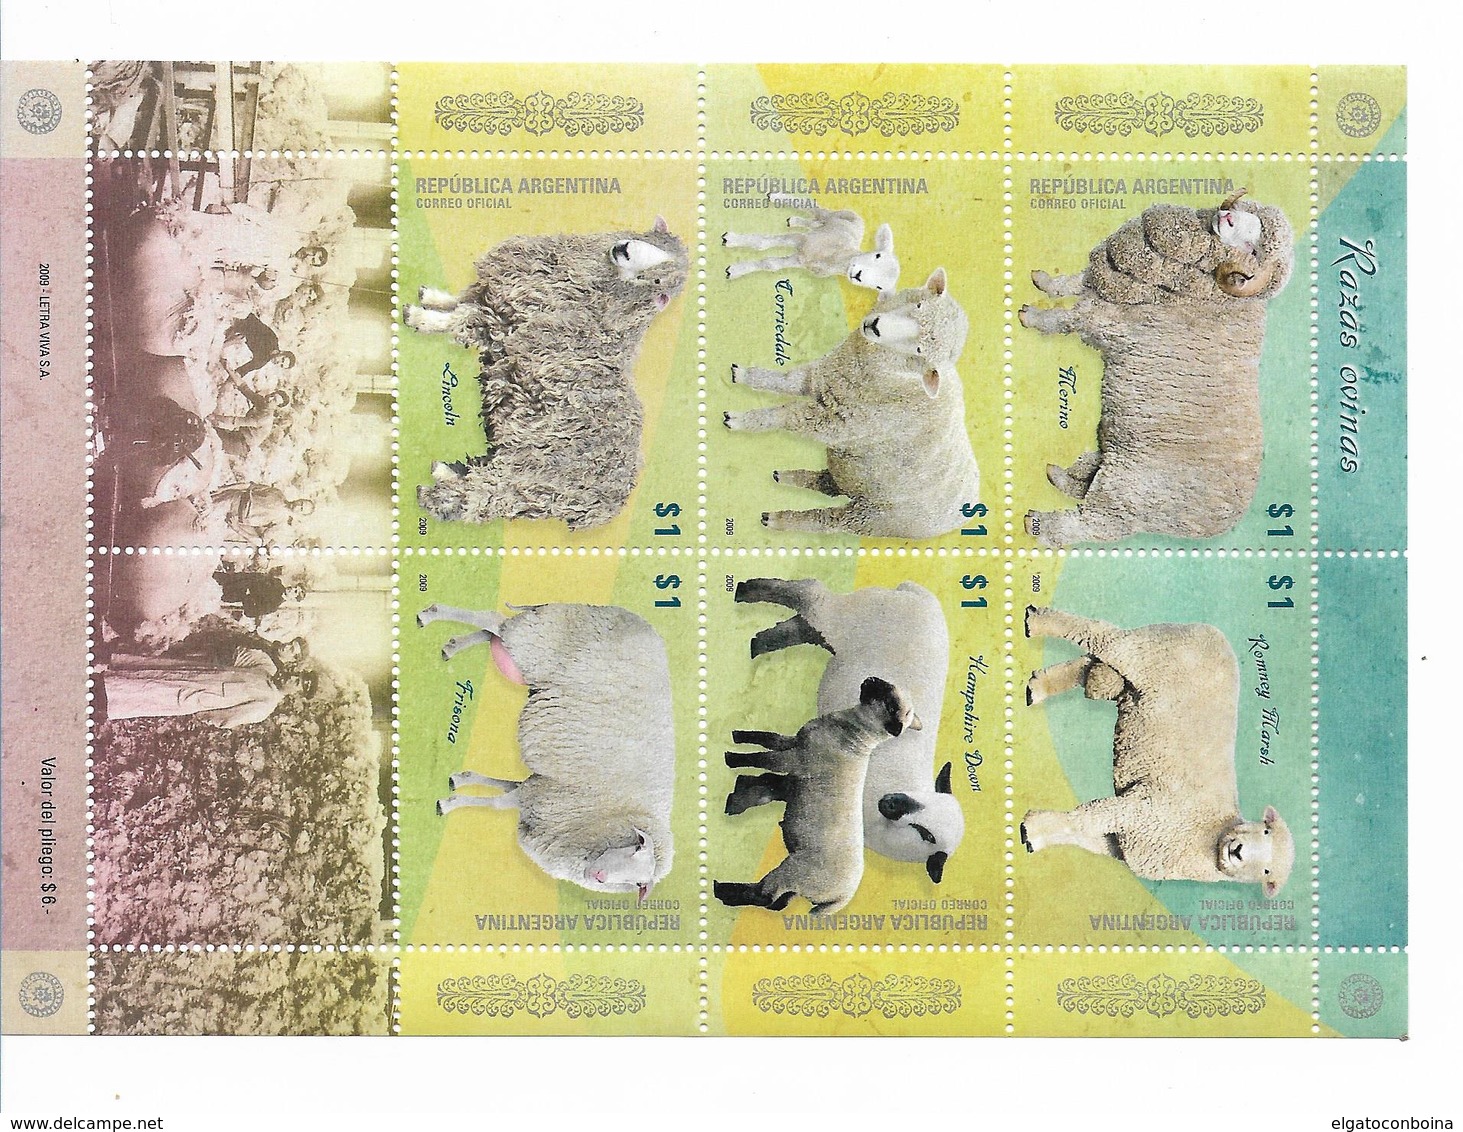 ARGENTINA 2009 SHEEPS MINI SHEET WITH 6 STAMPS MINT VERY FINE - Nuevos